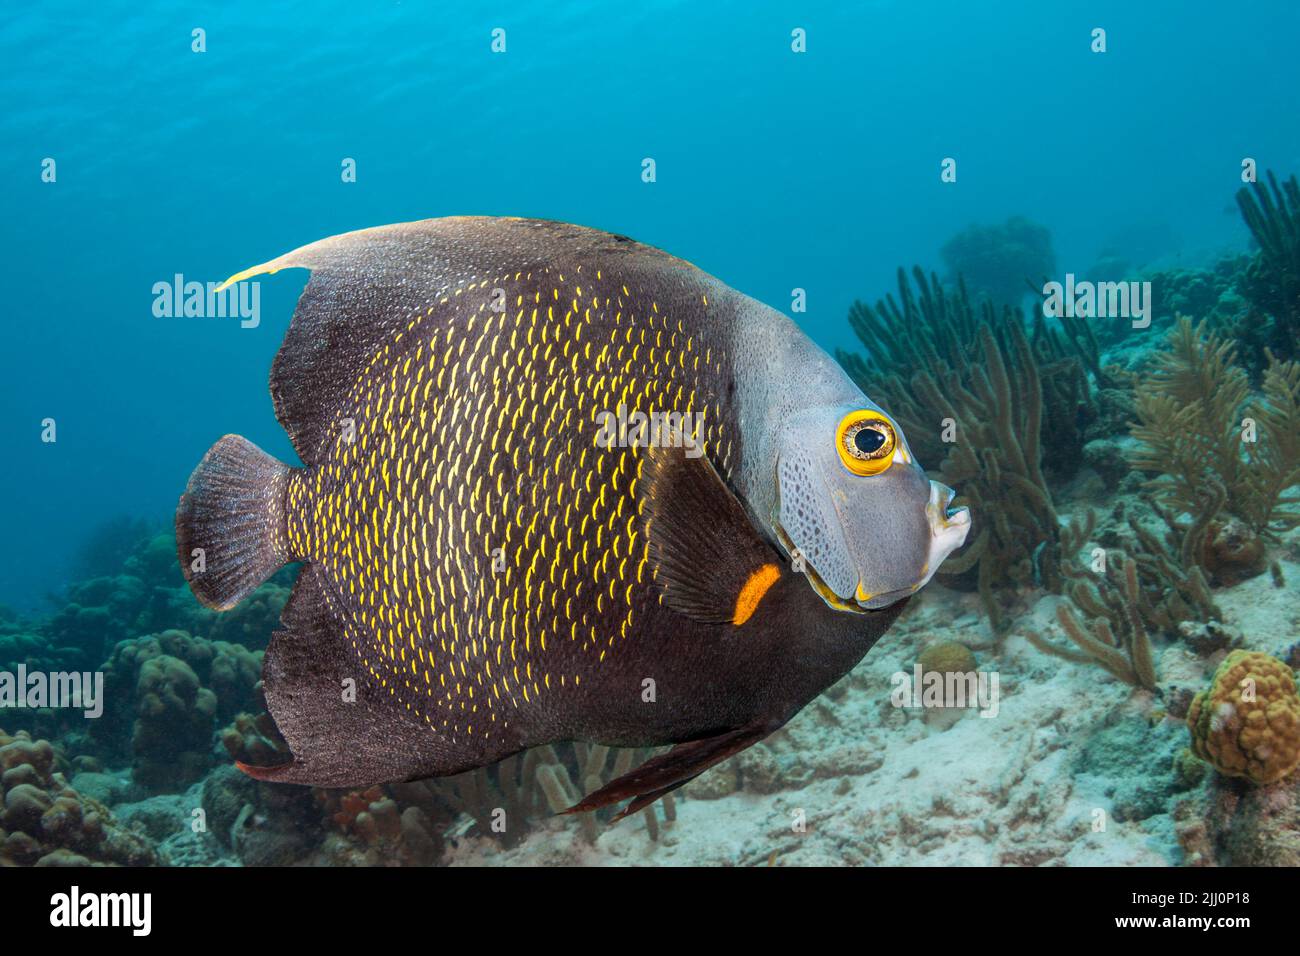 The French angelfish, Pomacanthus paru, is often found in pairs and is common in the Caribbean, Bonaire. Stock Photo